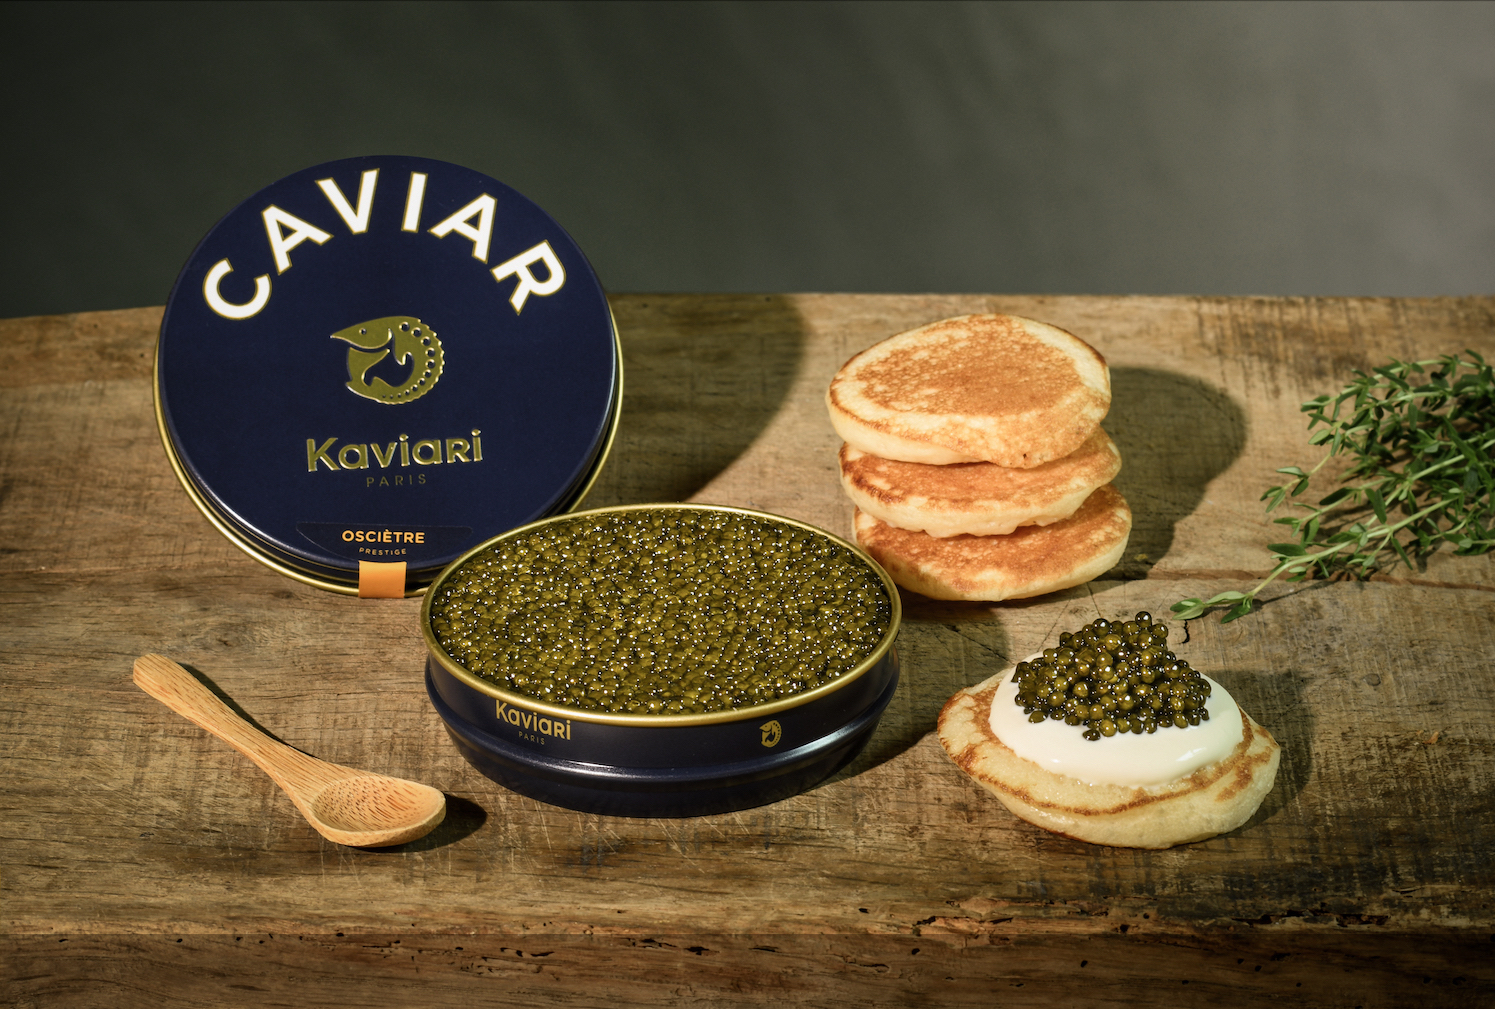 Grower Champagne and Caviar Discovery Tasting with Paul Janson from Kaviari Paris